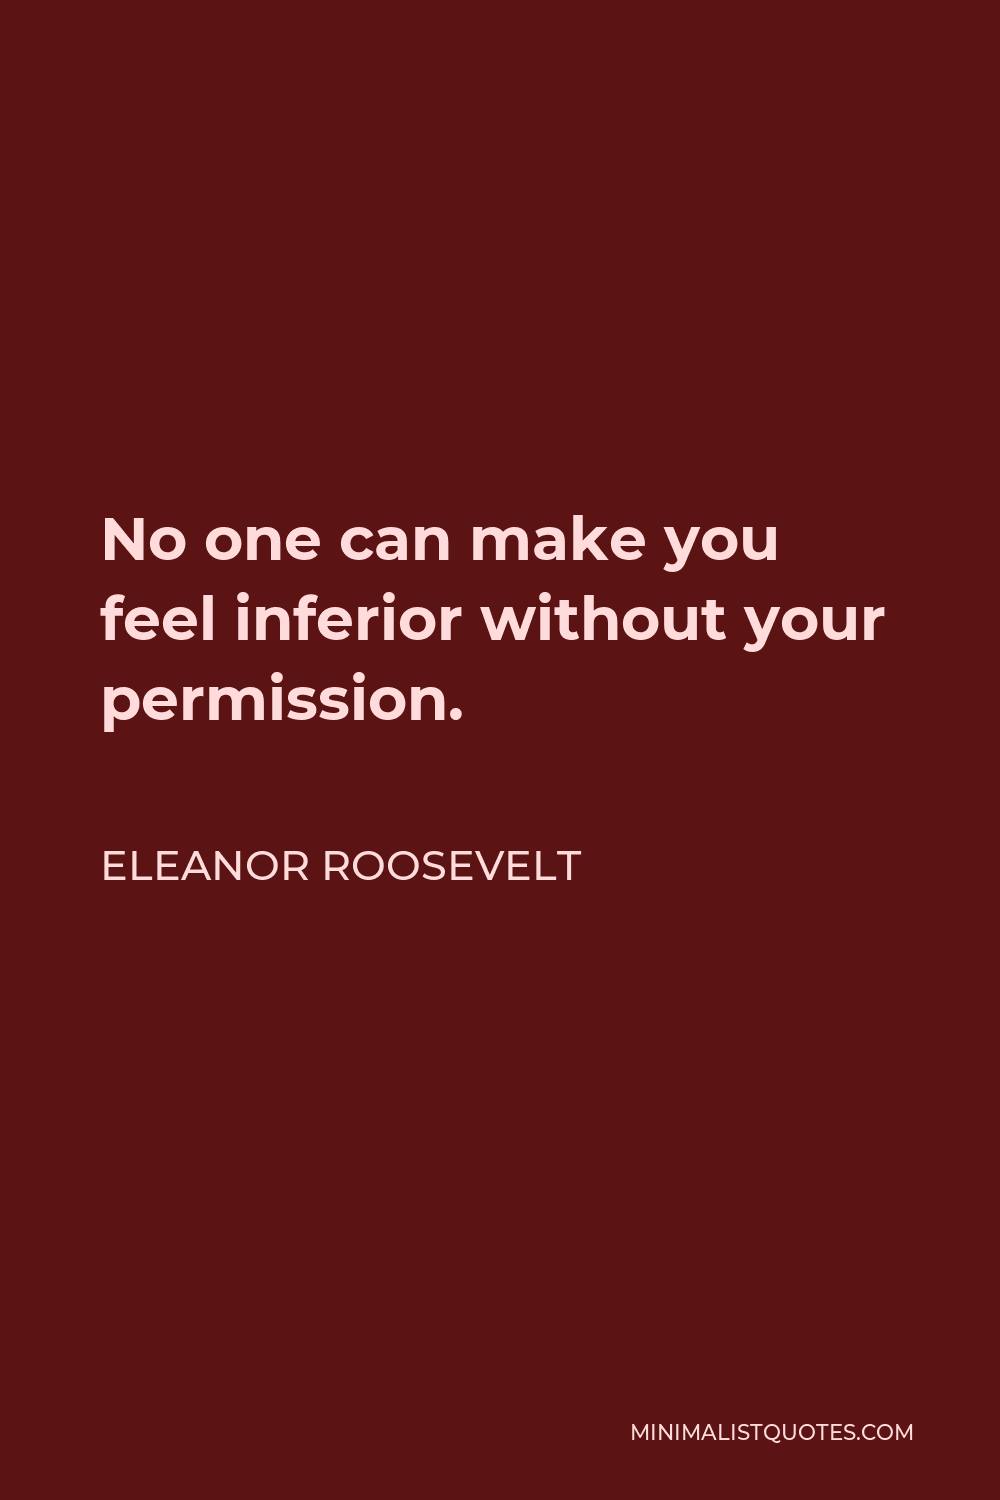 Eleanor Roosevelt Quote - No one can make you feel inferior without your consent.